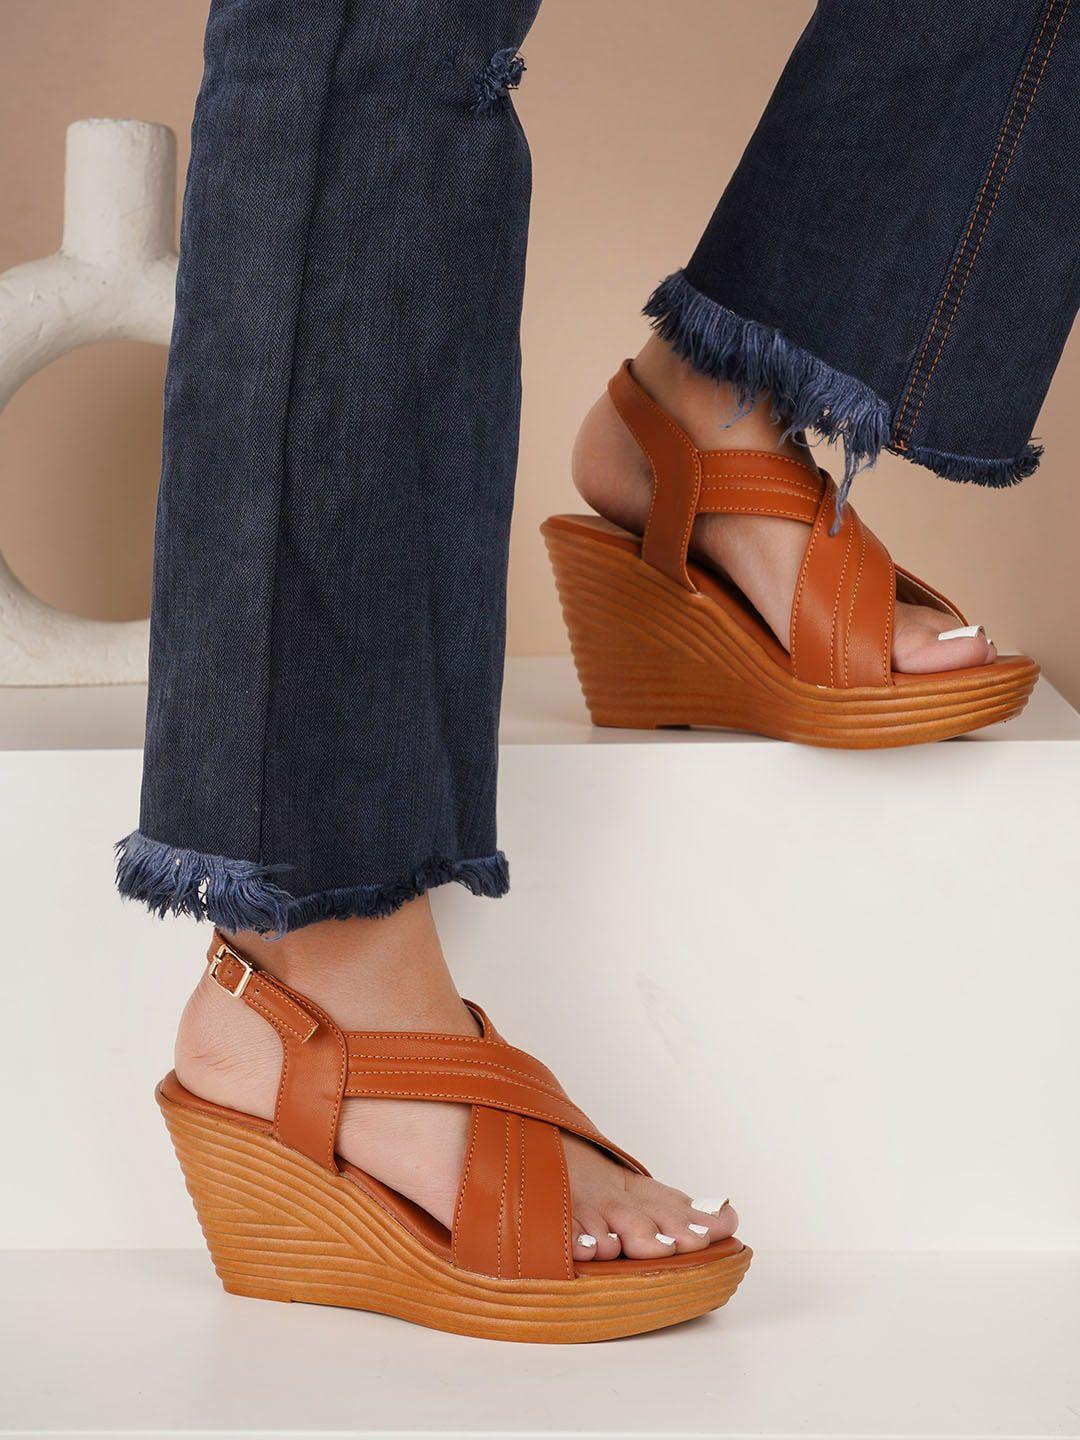 the roadster lifestyle co. tan brown textured open toe wedges with backstrap